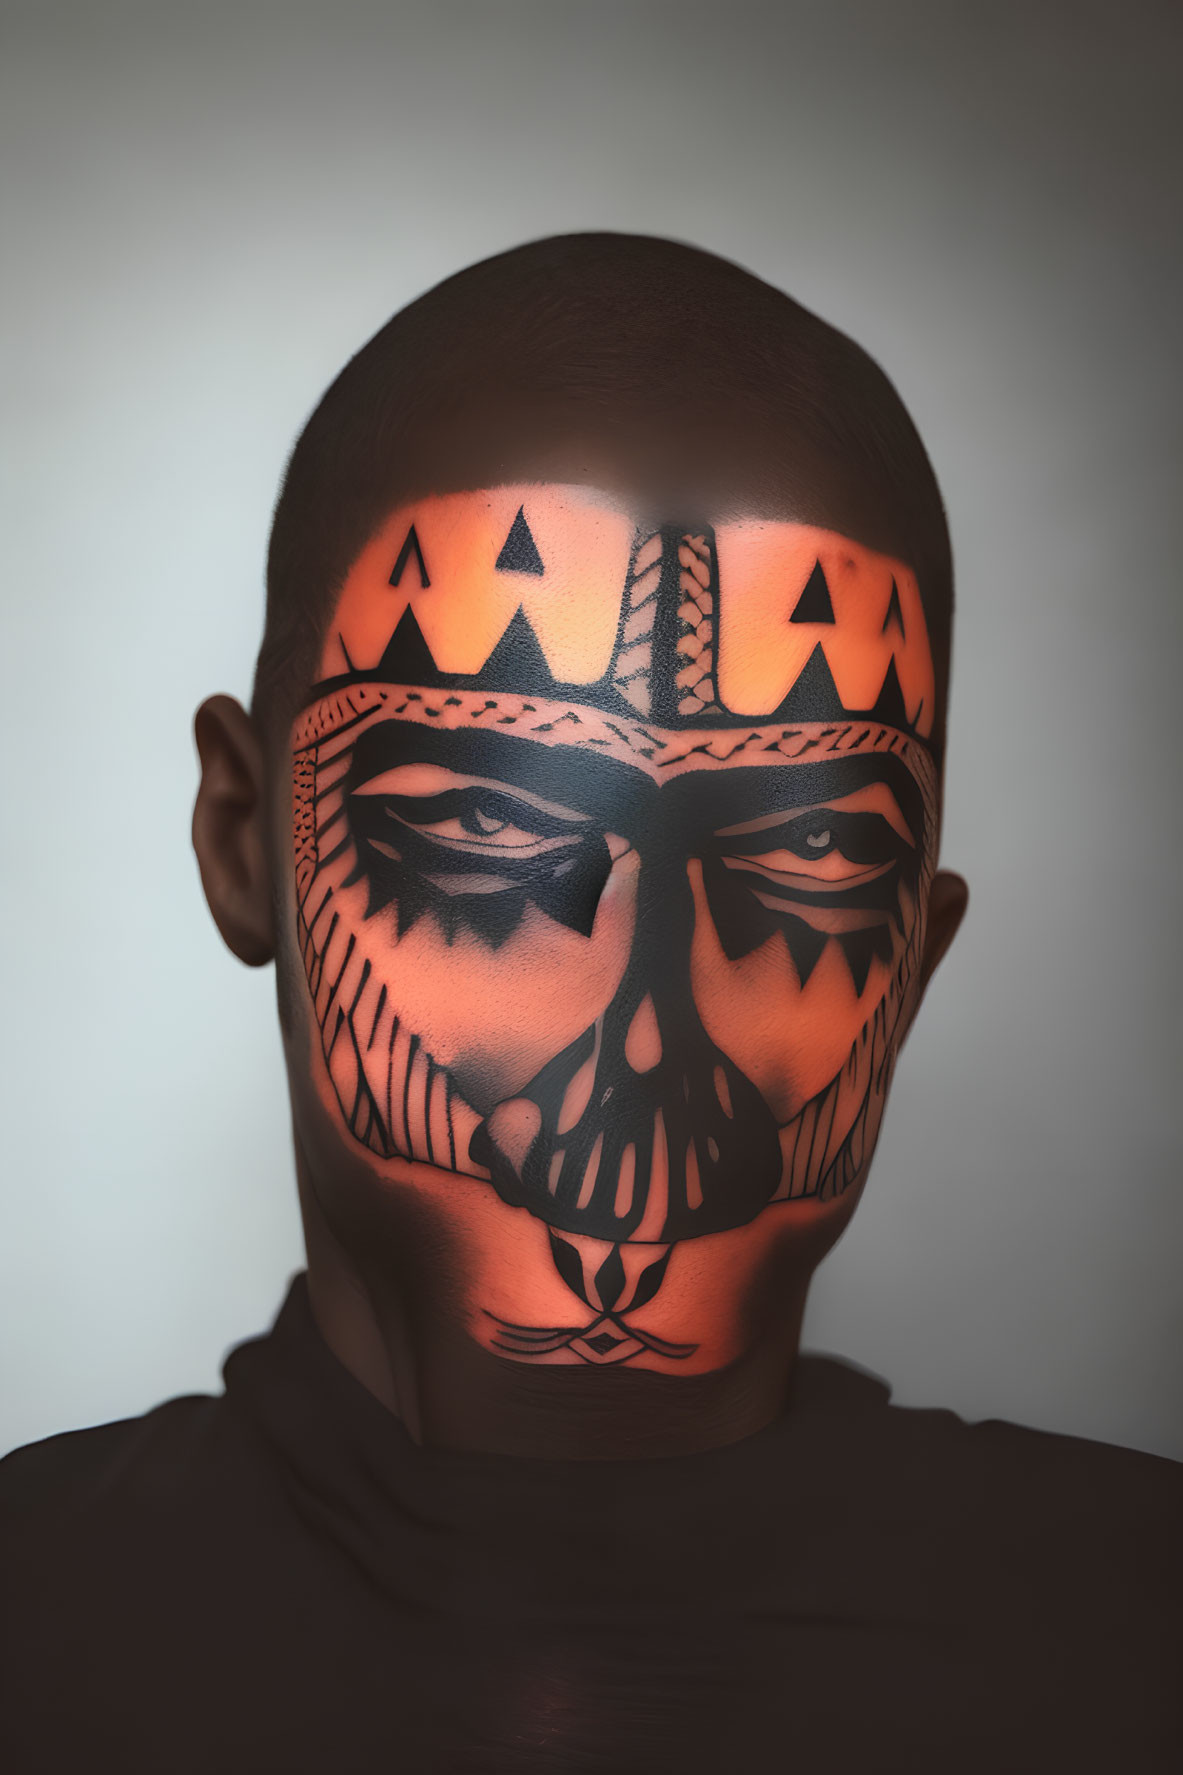 Person with Jack-o'-lantern Face Paint and Glowing Eyes